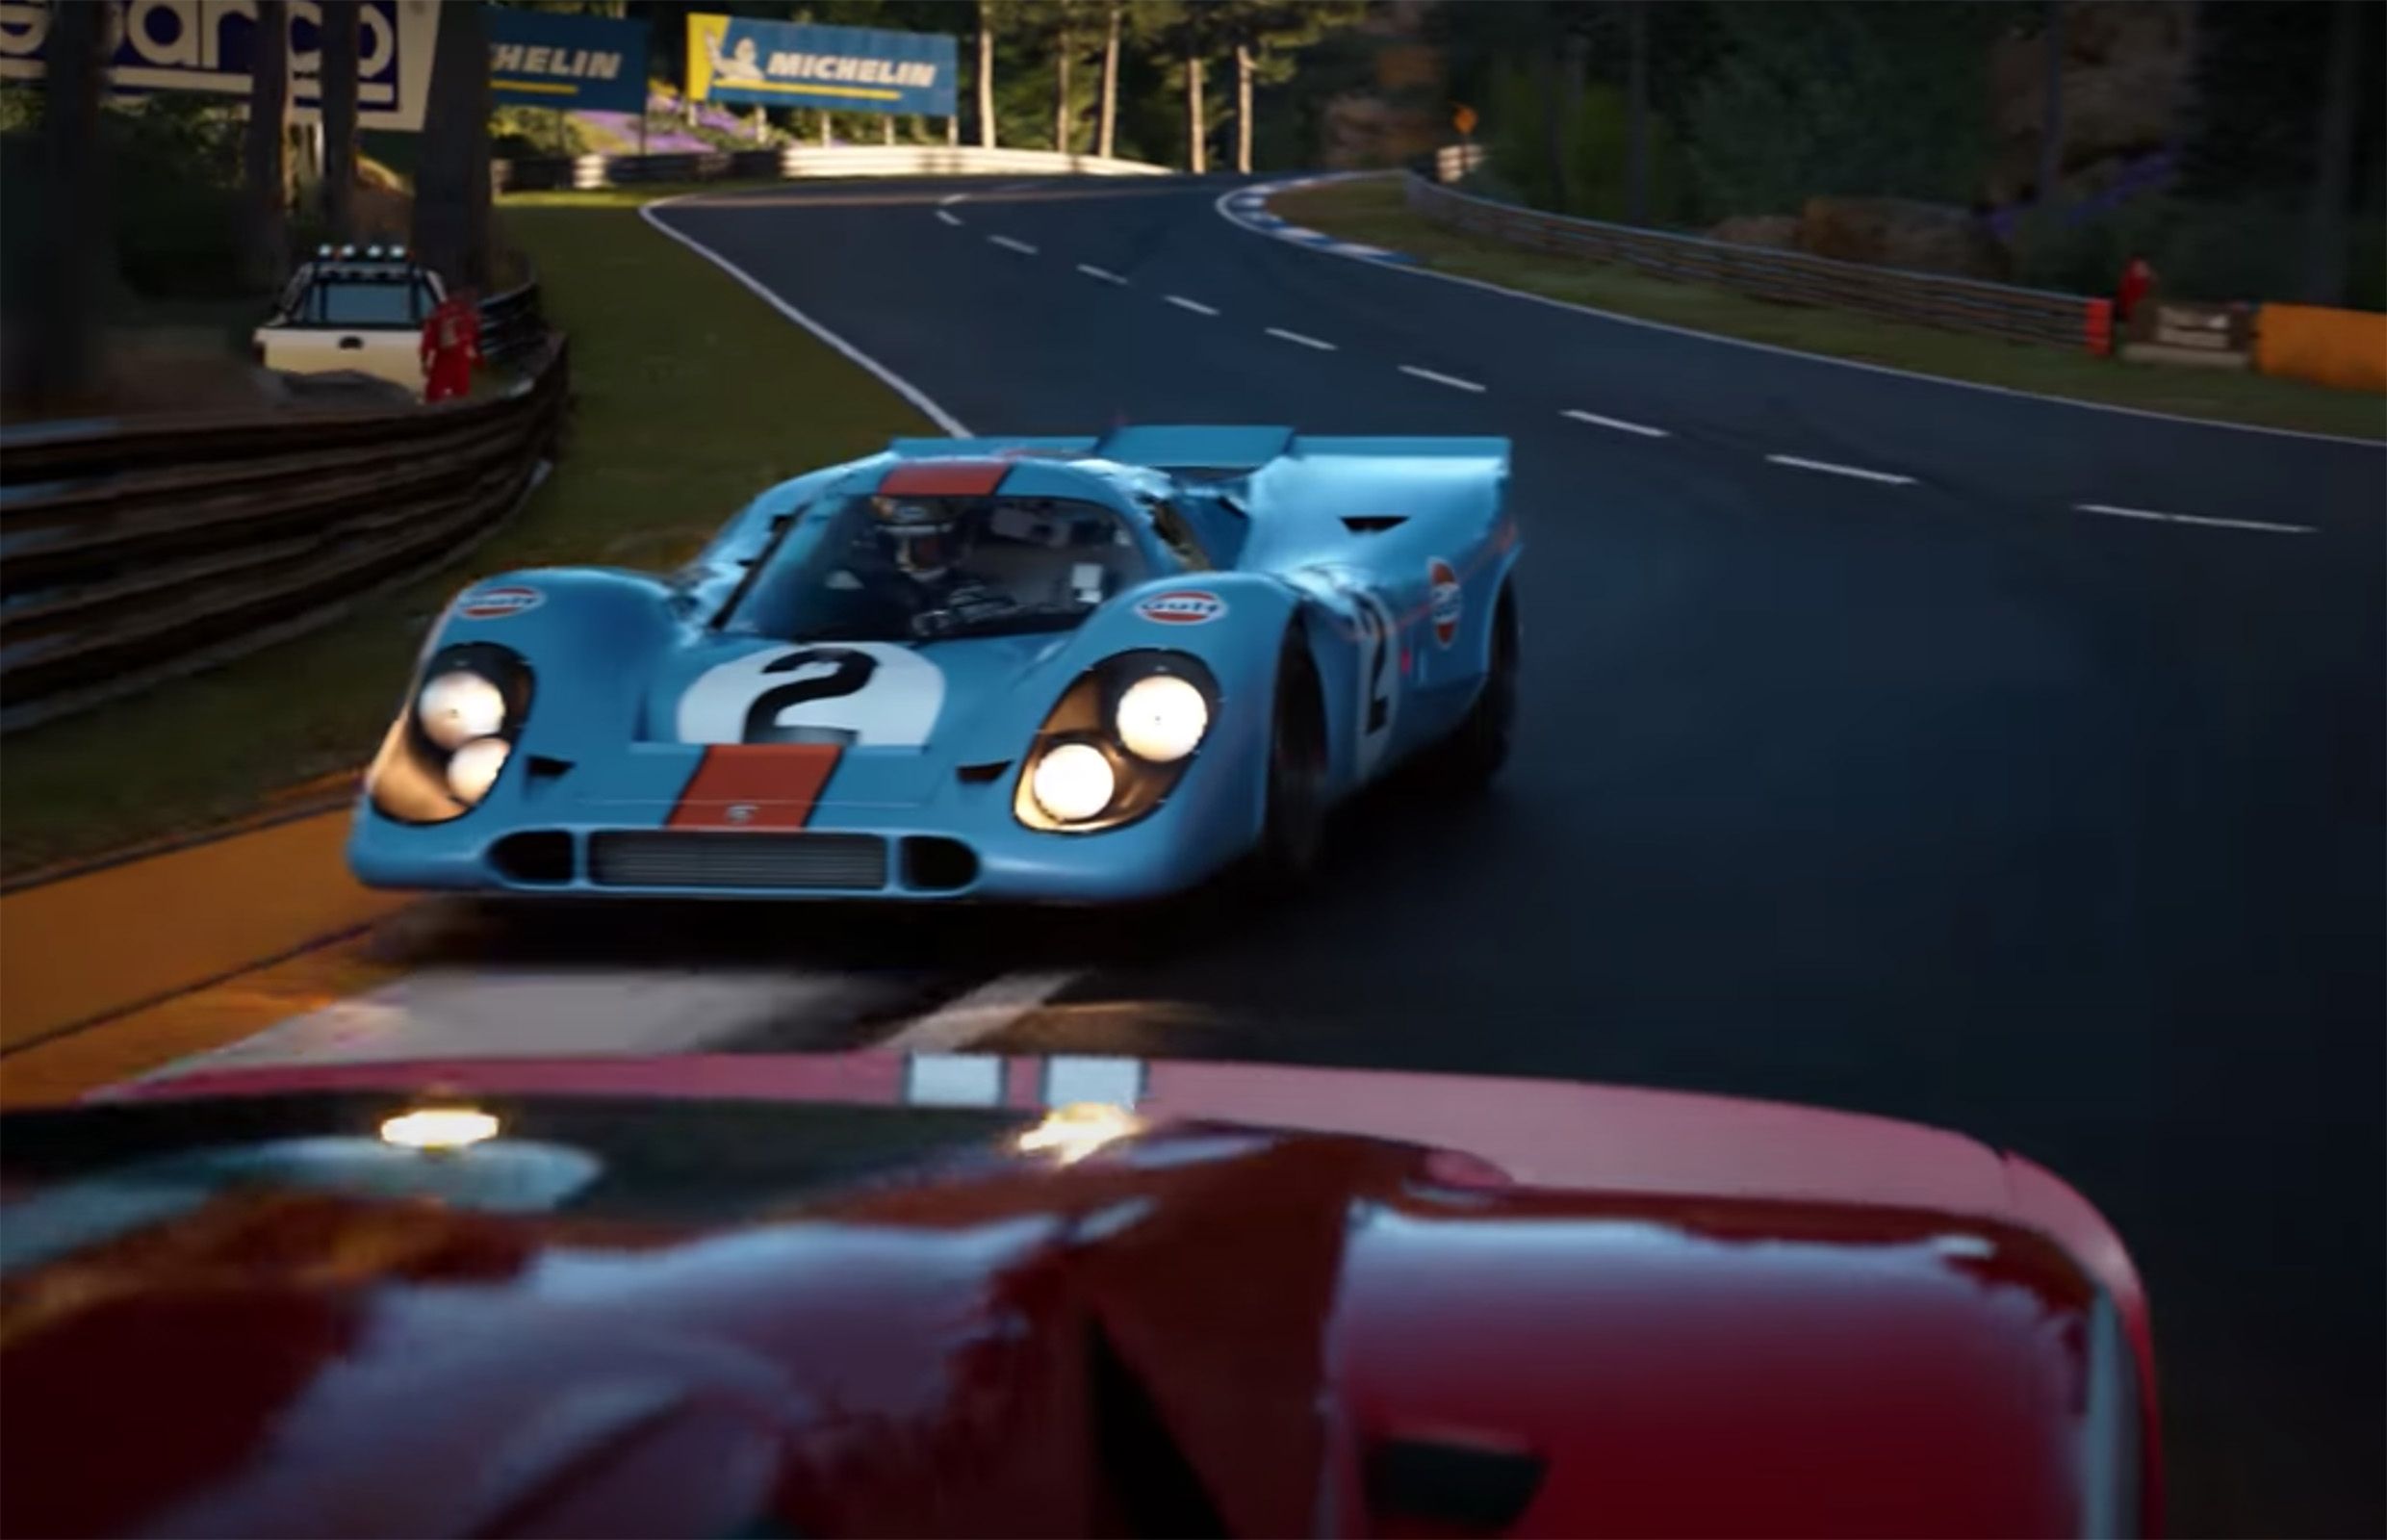 Watch Trailer Shows Off New Gran Turismo 7 Coming To Playstation 5